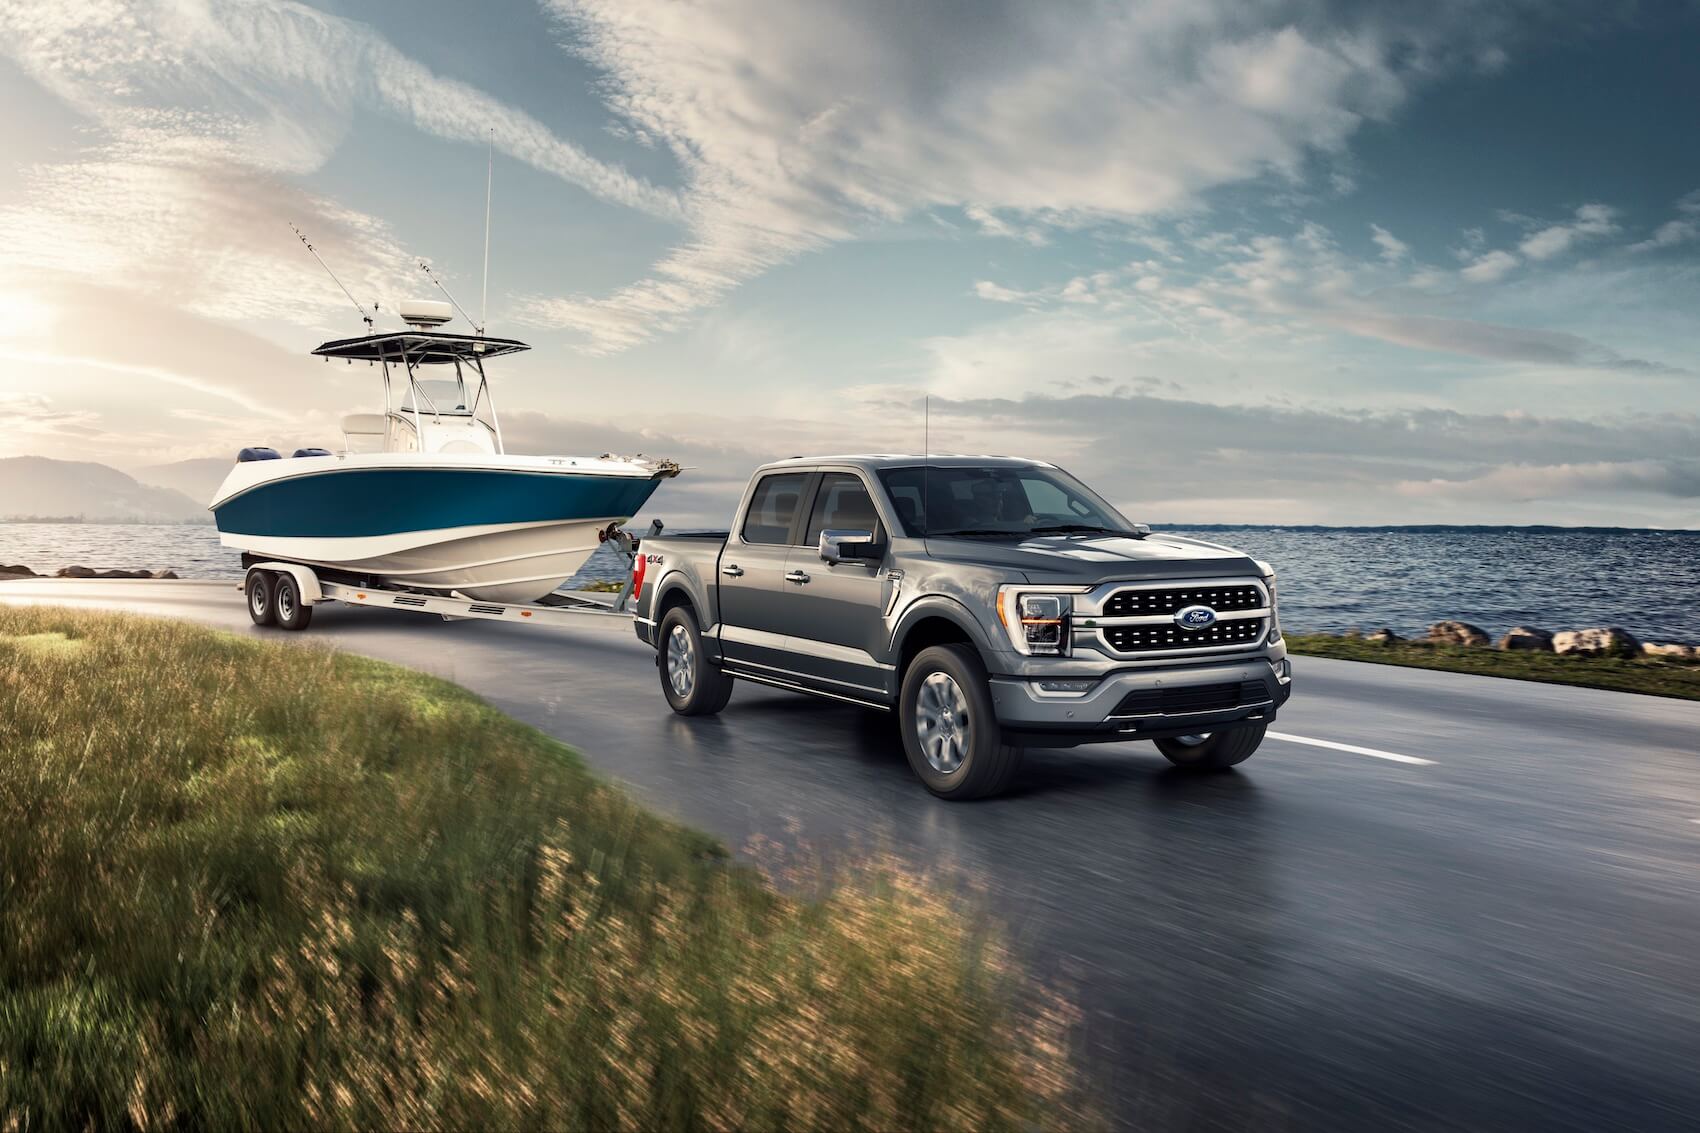 2020 Ford F-150 Review Jasper AL | Bill Penney Ford 2020 F 150 5.0 L Towing Capacity